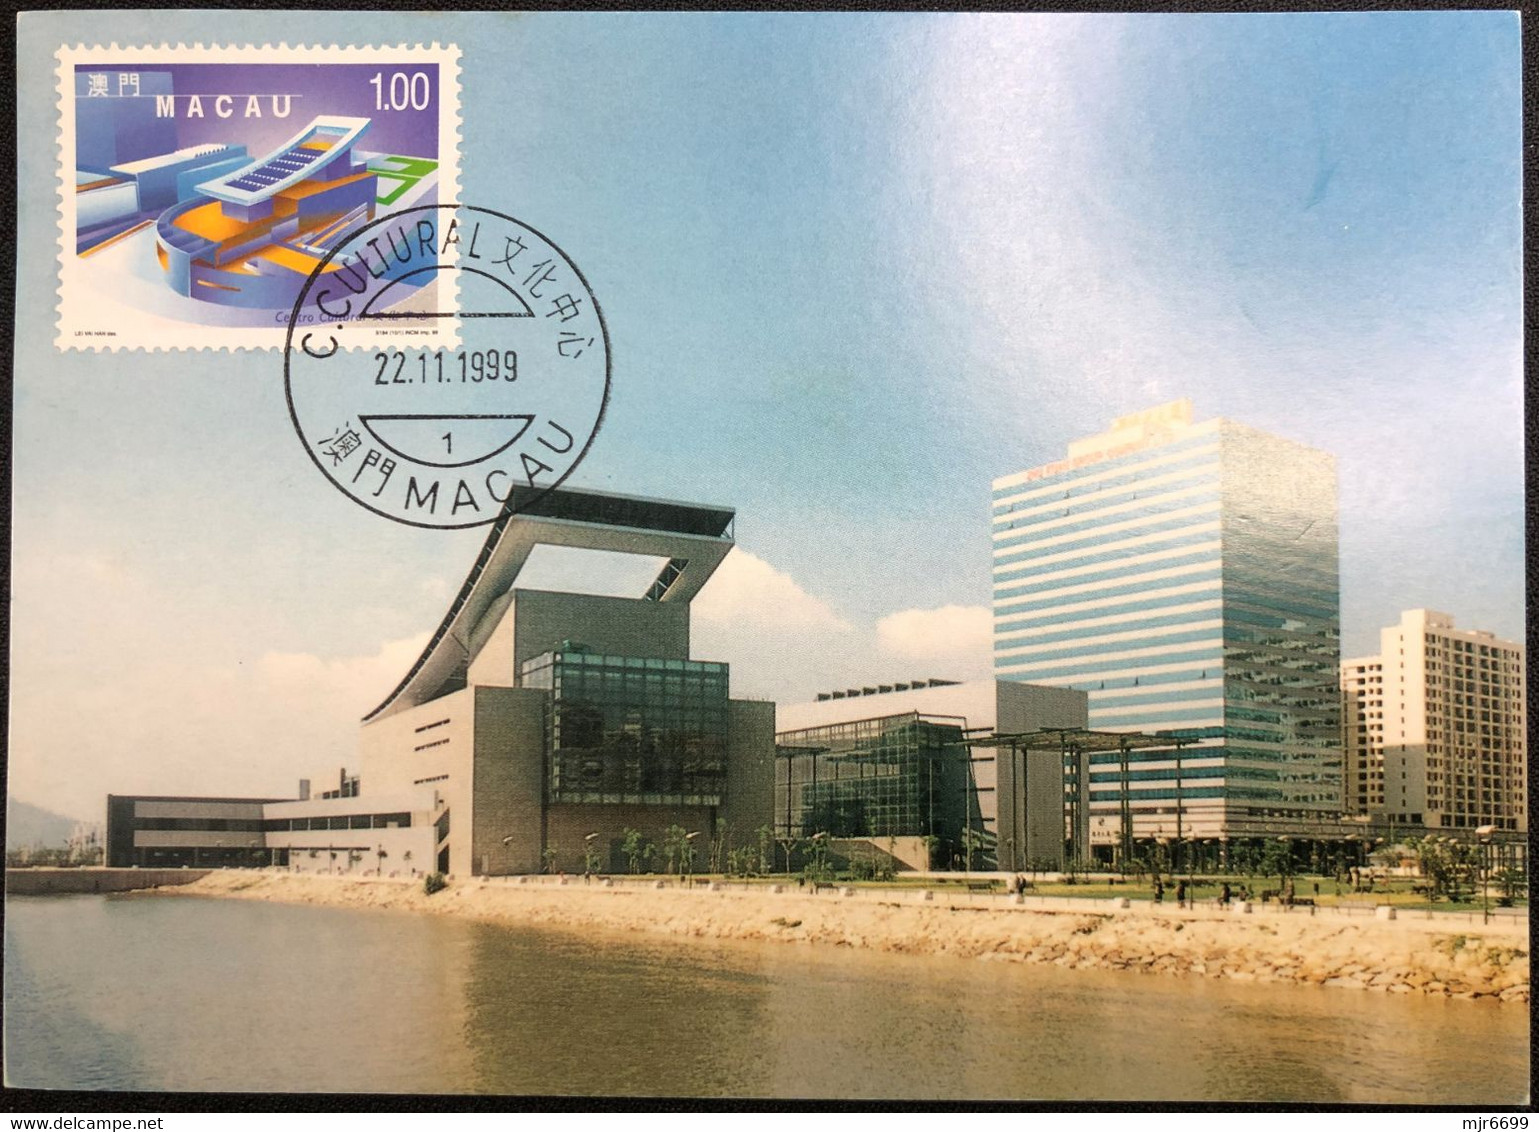 MACAU 1999 CULTURAL CENTRE MAX CARD (FIRST DAY WORK OF THE POST OFFICE IN THIS CENTRE) - Maximumkaarten